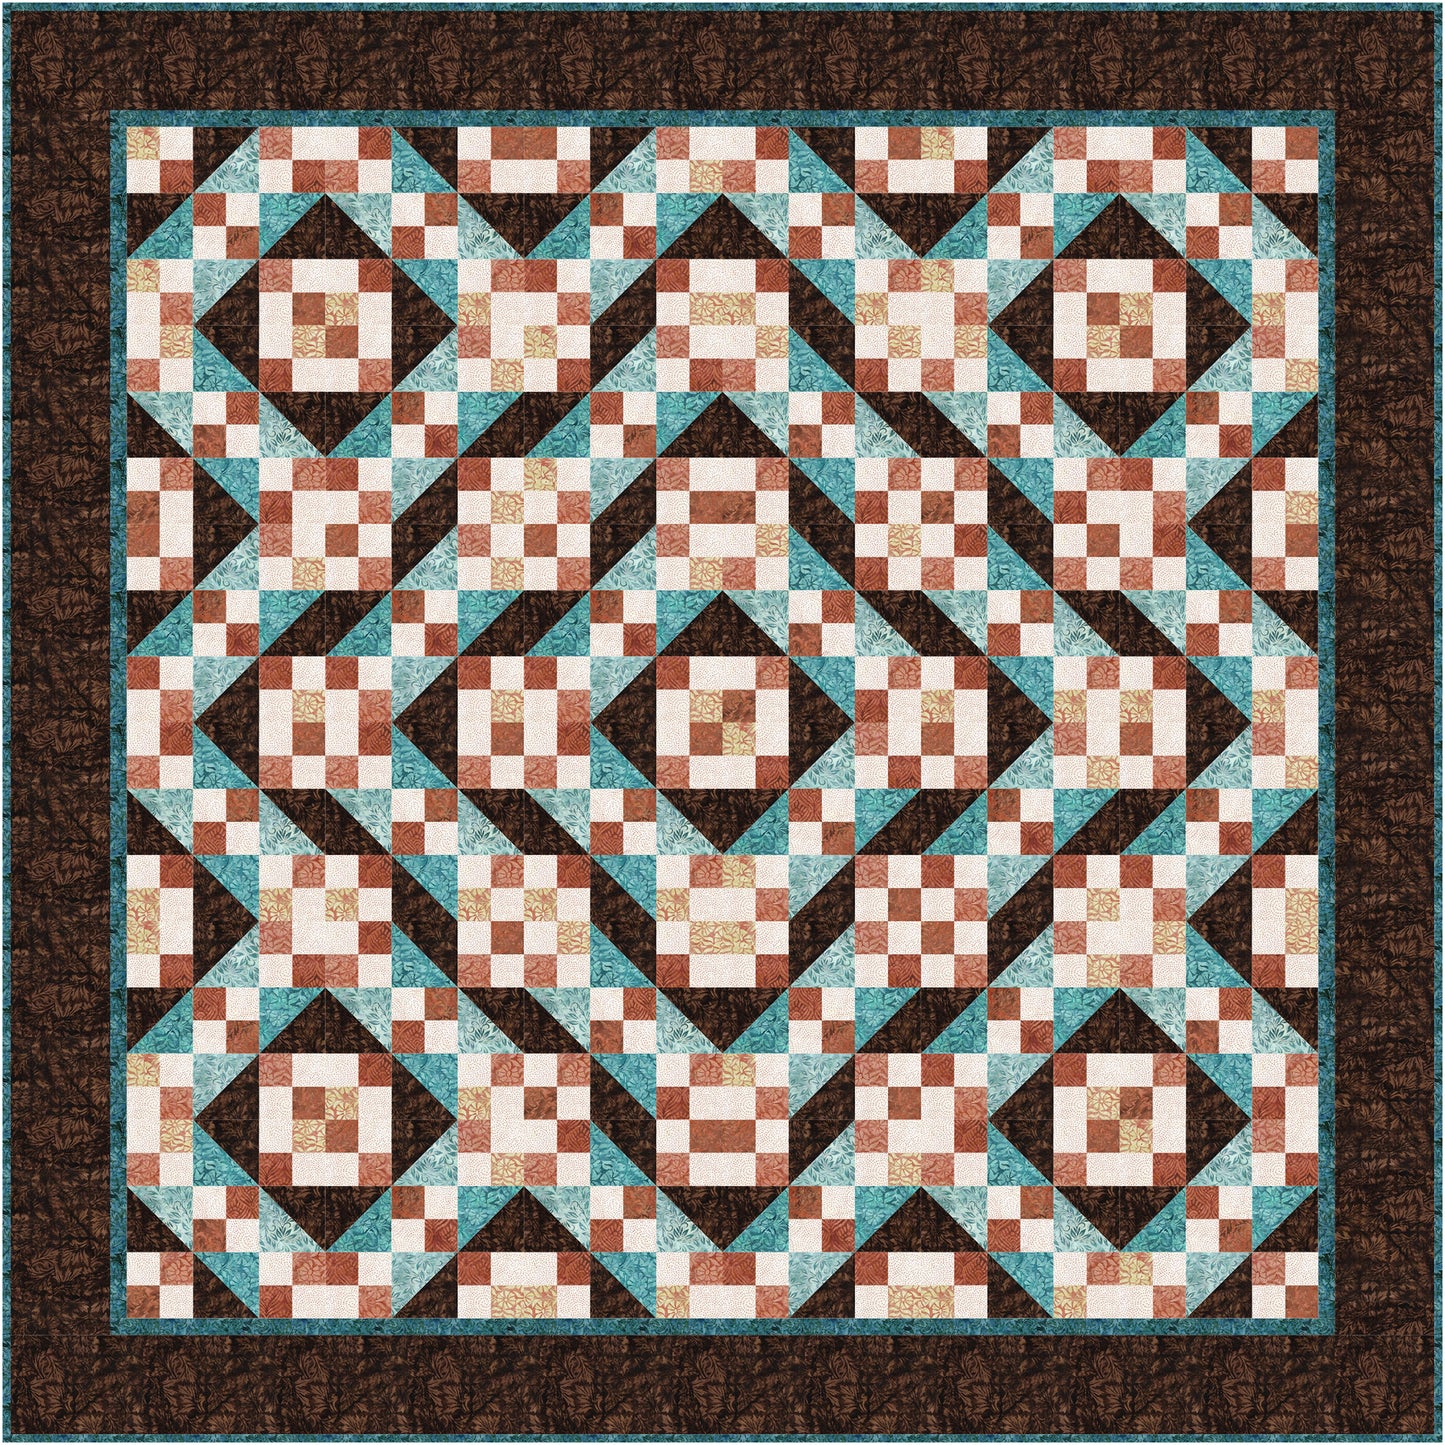 A colorful quilt with a square design featuring intricate patterns and vibrant colors in browns, creams, and teal.